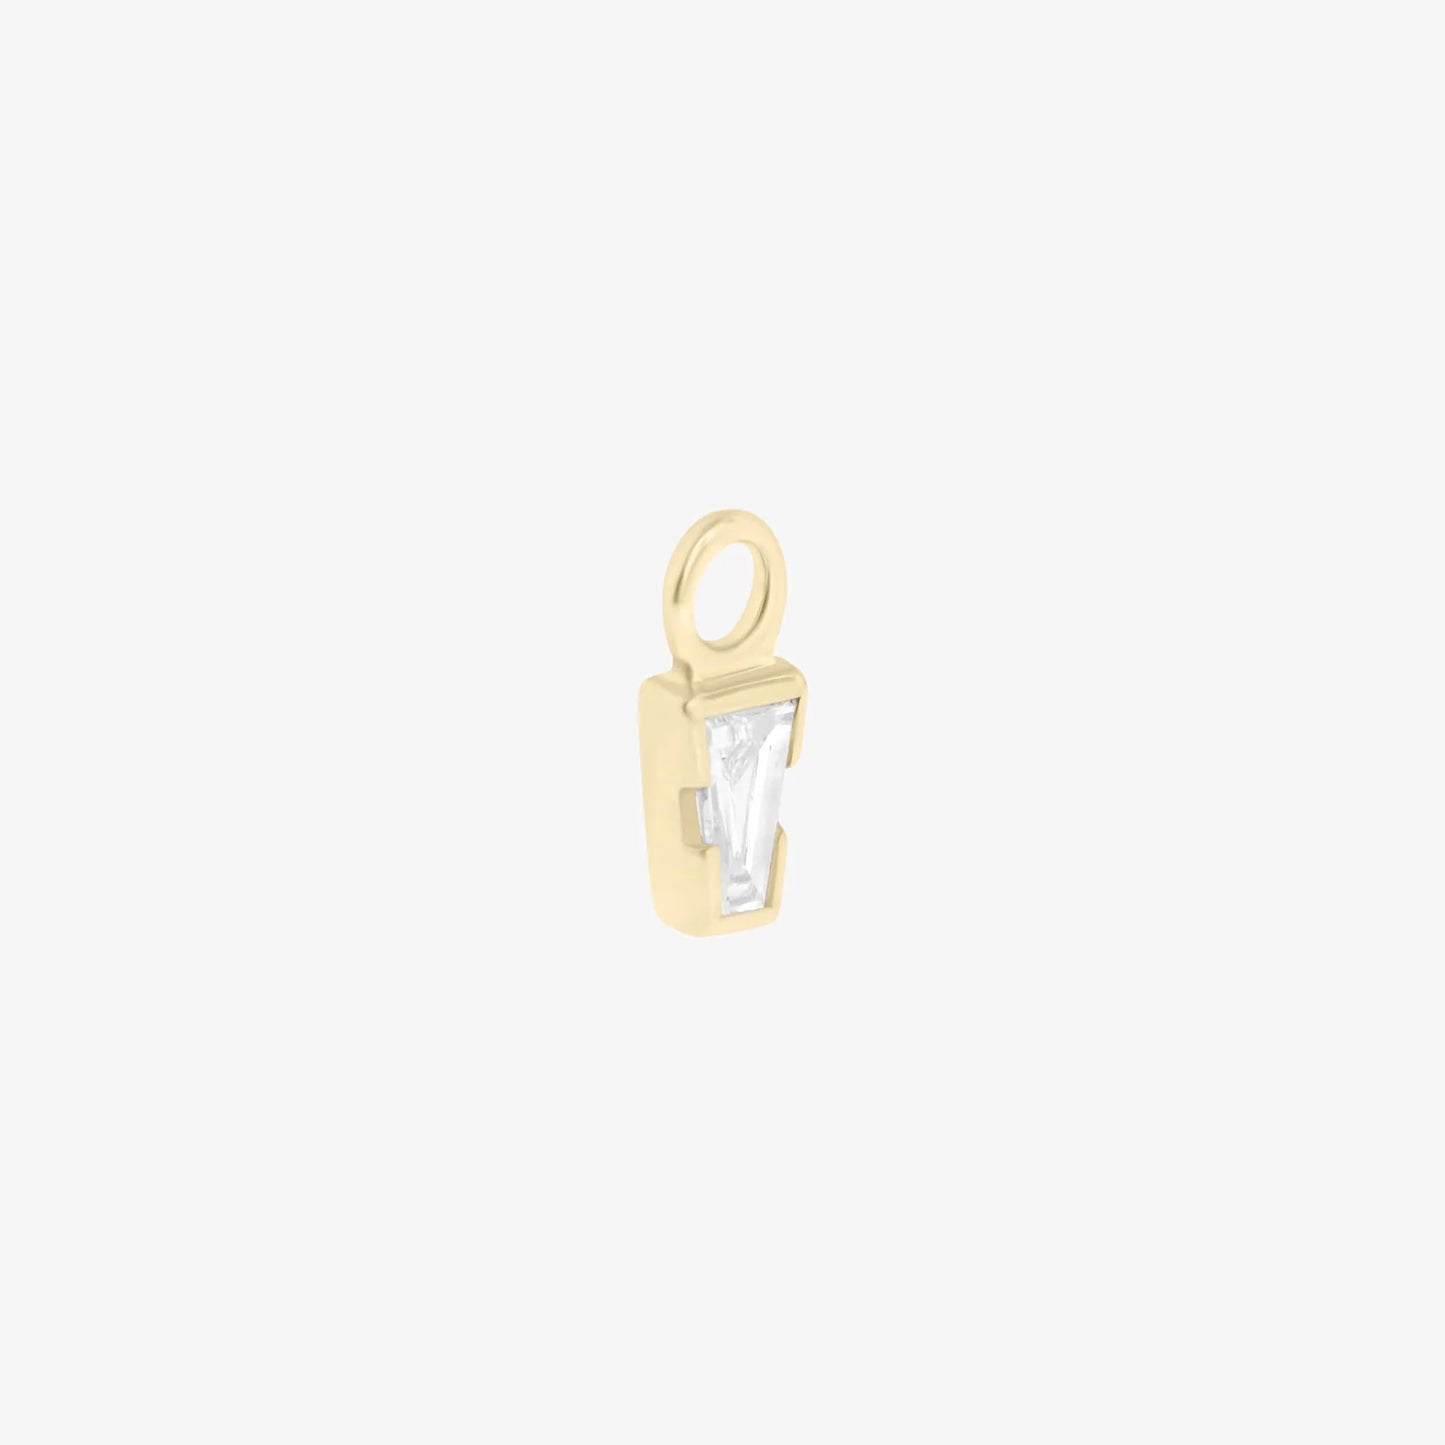 TETHER - LINDA TAPERED BAGUETTE - DIAMOND -14KT SOLID GOLD - CHARM